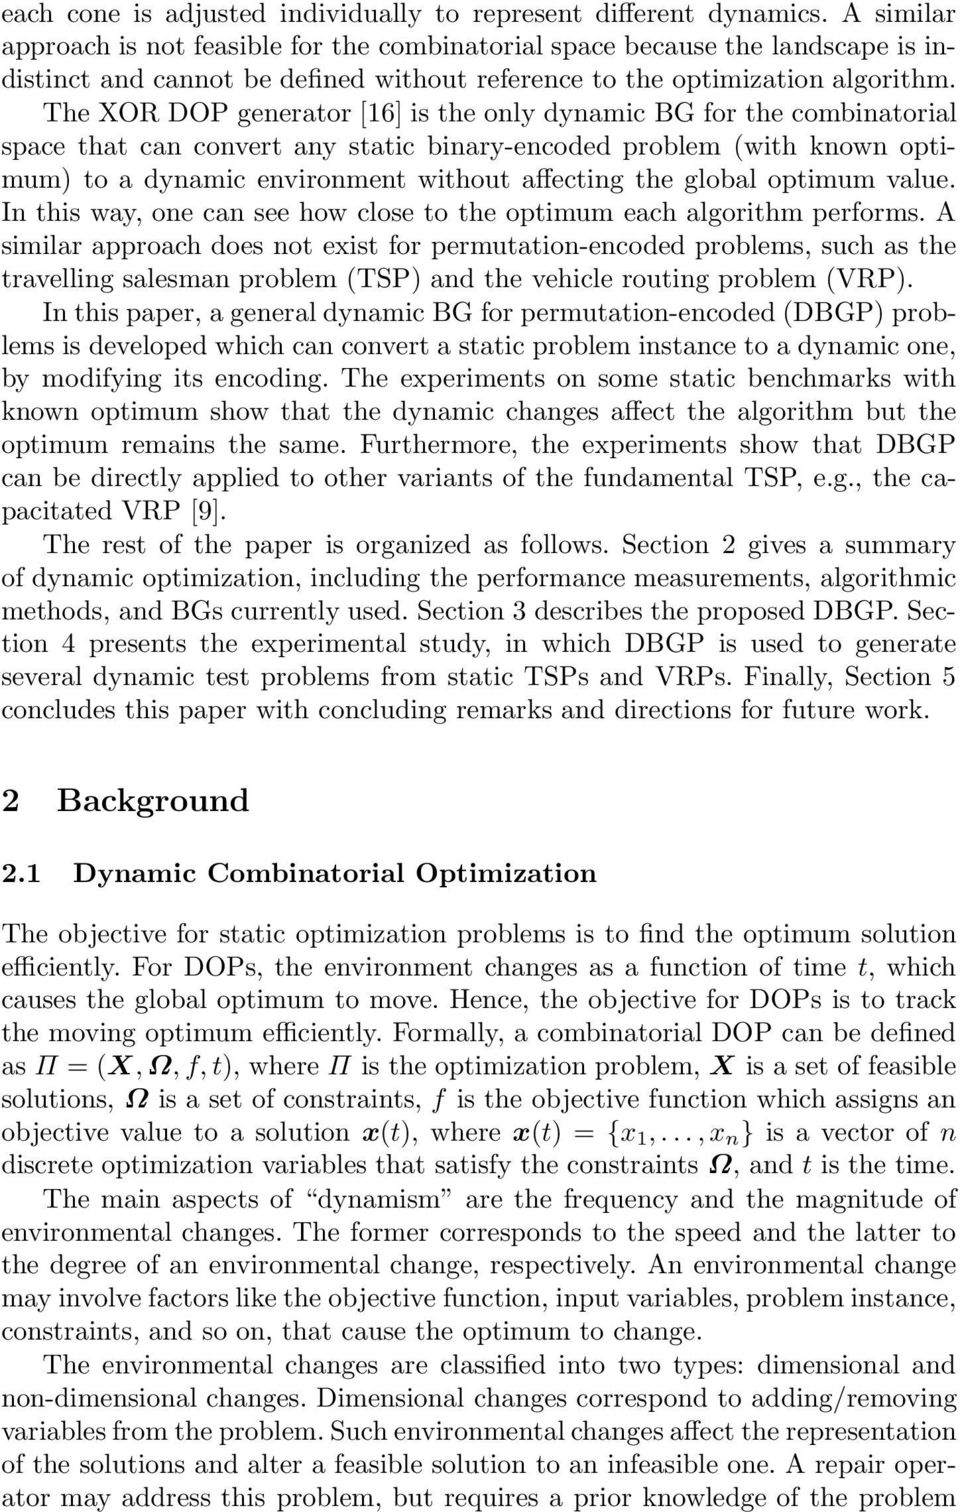 The XOR DOP generator [16] is the only dynamic BG for the combinatorial space that can convert any static binary-encoded problem (with known optimum) to a dynamic environment without affecting the